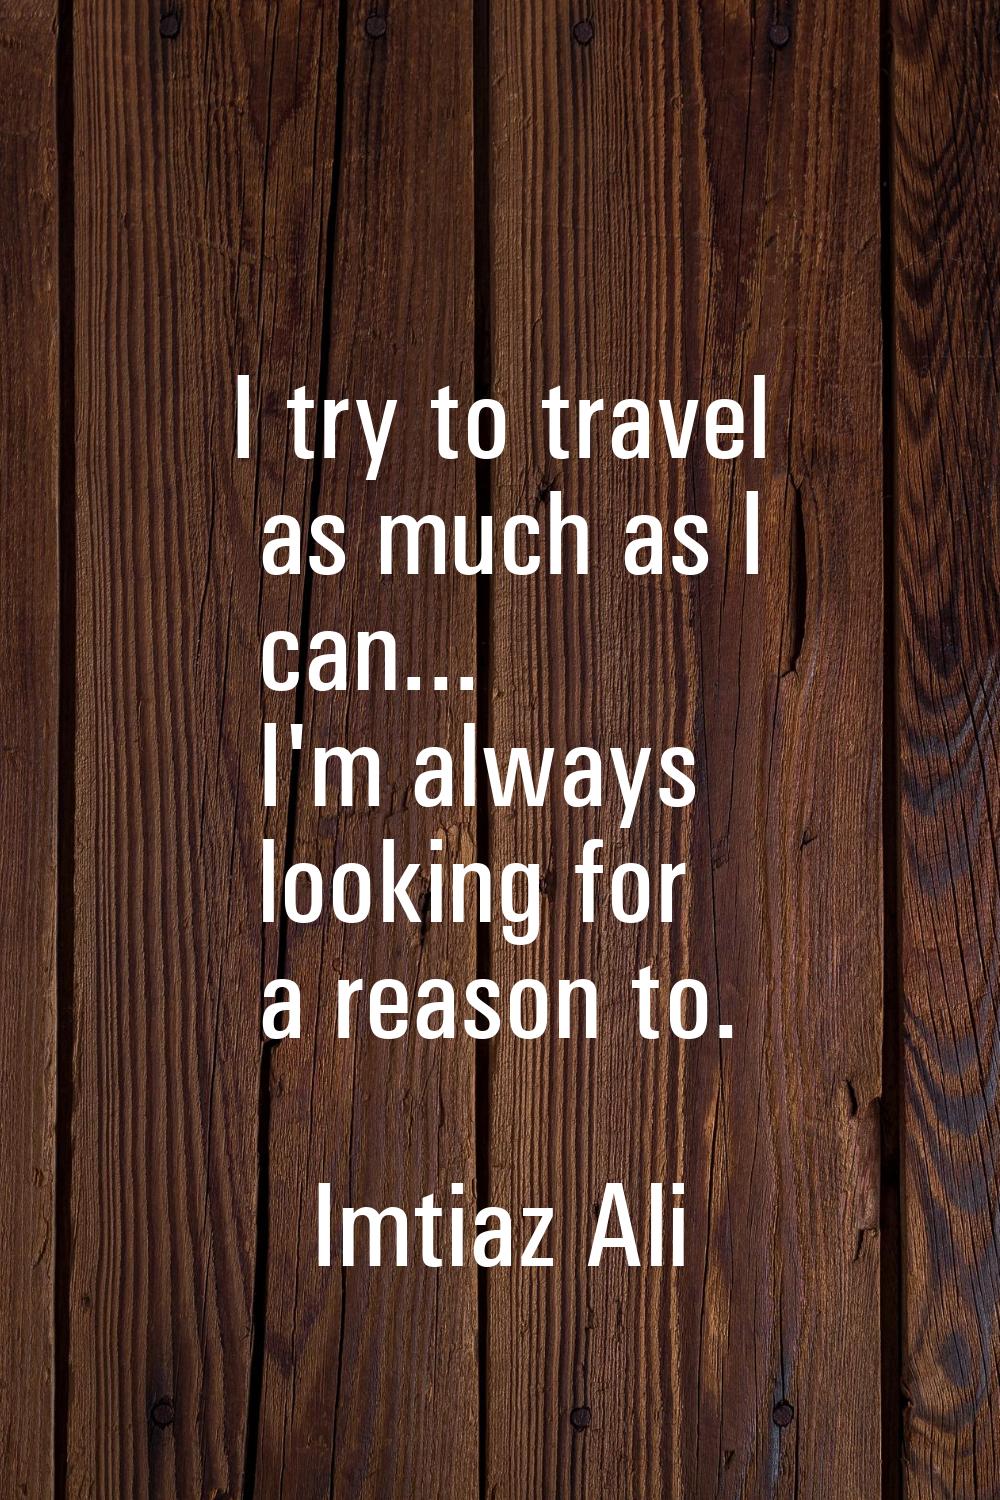 I try to travel as much as I can... I'm always looking for a reason to.